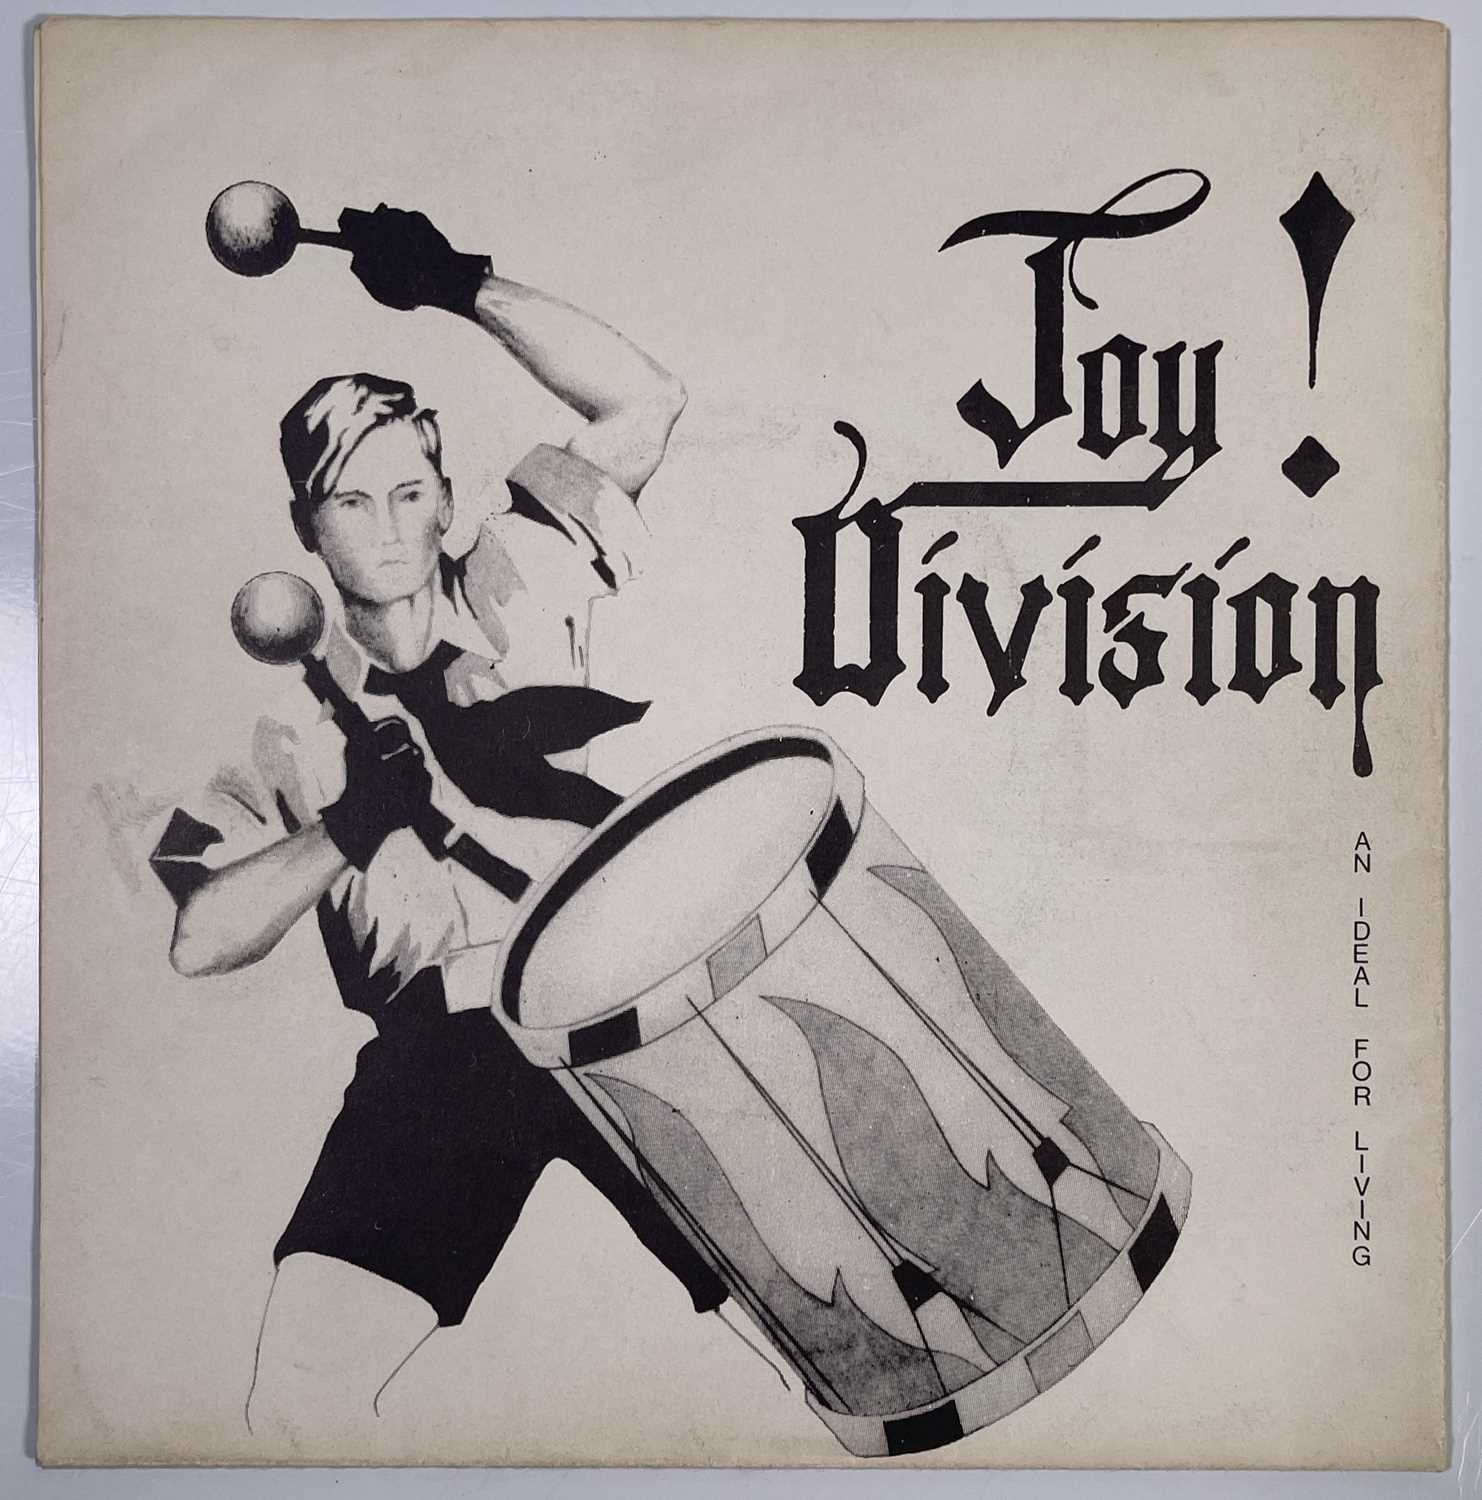 JOY DIVISION - AN IDEAL FOR LIVING 7" (ORIGINAL UK RELEASE - ENIGMA RECORDS - PSS 139)